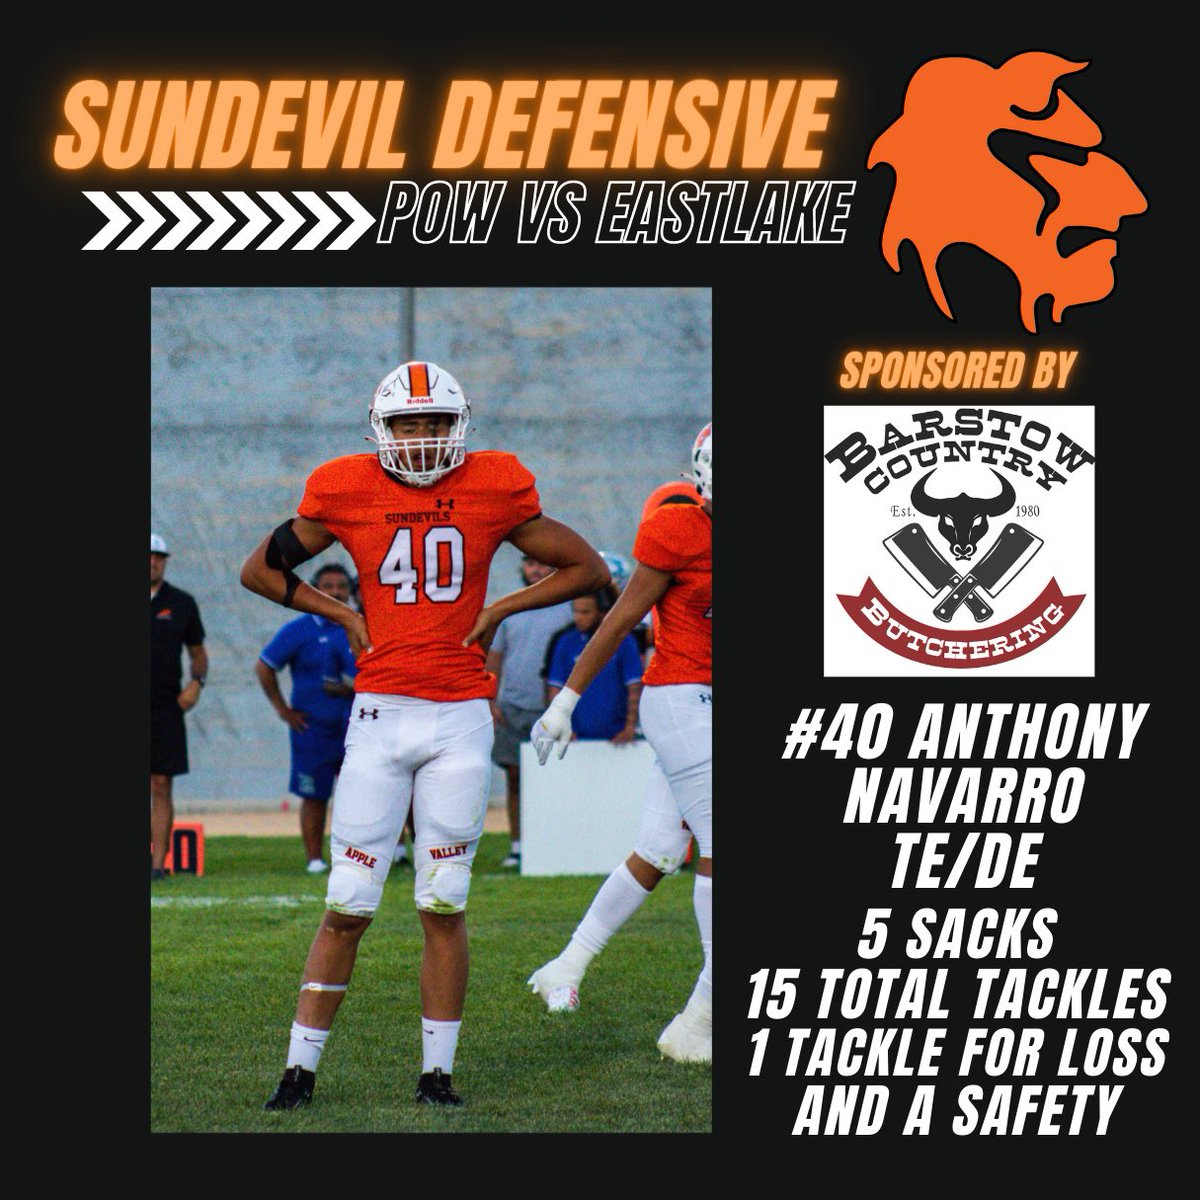 Sundevil Defensive Player Of The Week is sponsored by Trident Club supporter, Barstow Country Butchering 🥩 #40 TE/DE Anthony Navarro had 5 sacks, 15 total tackles, 1 tackle for loss, and a safety! Great Job Sundevil! 🔸